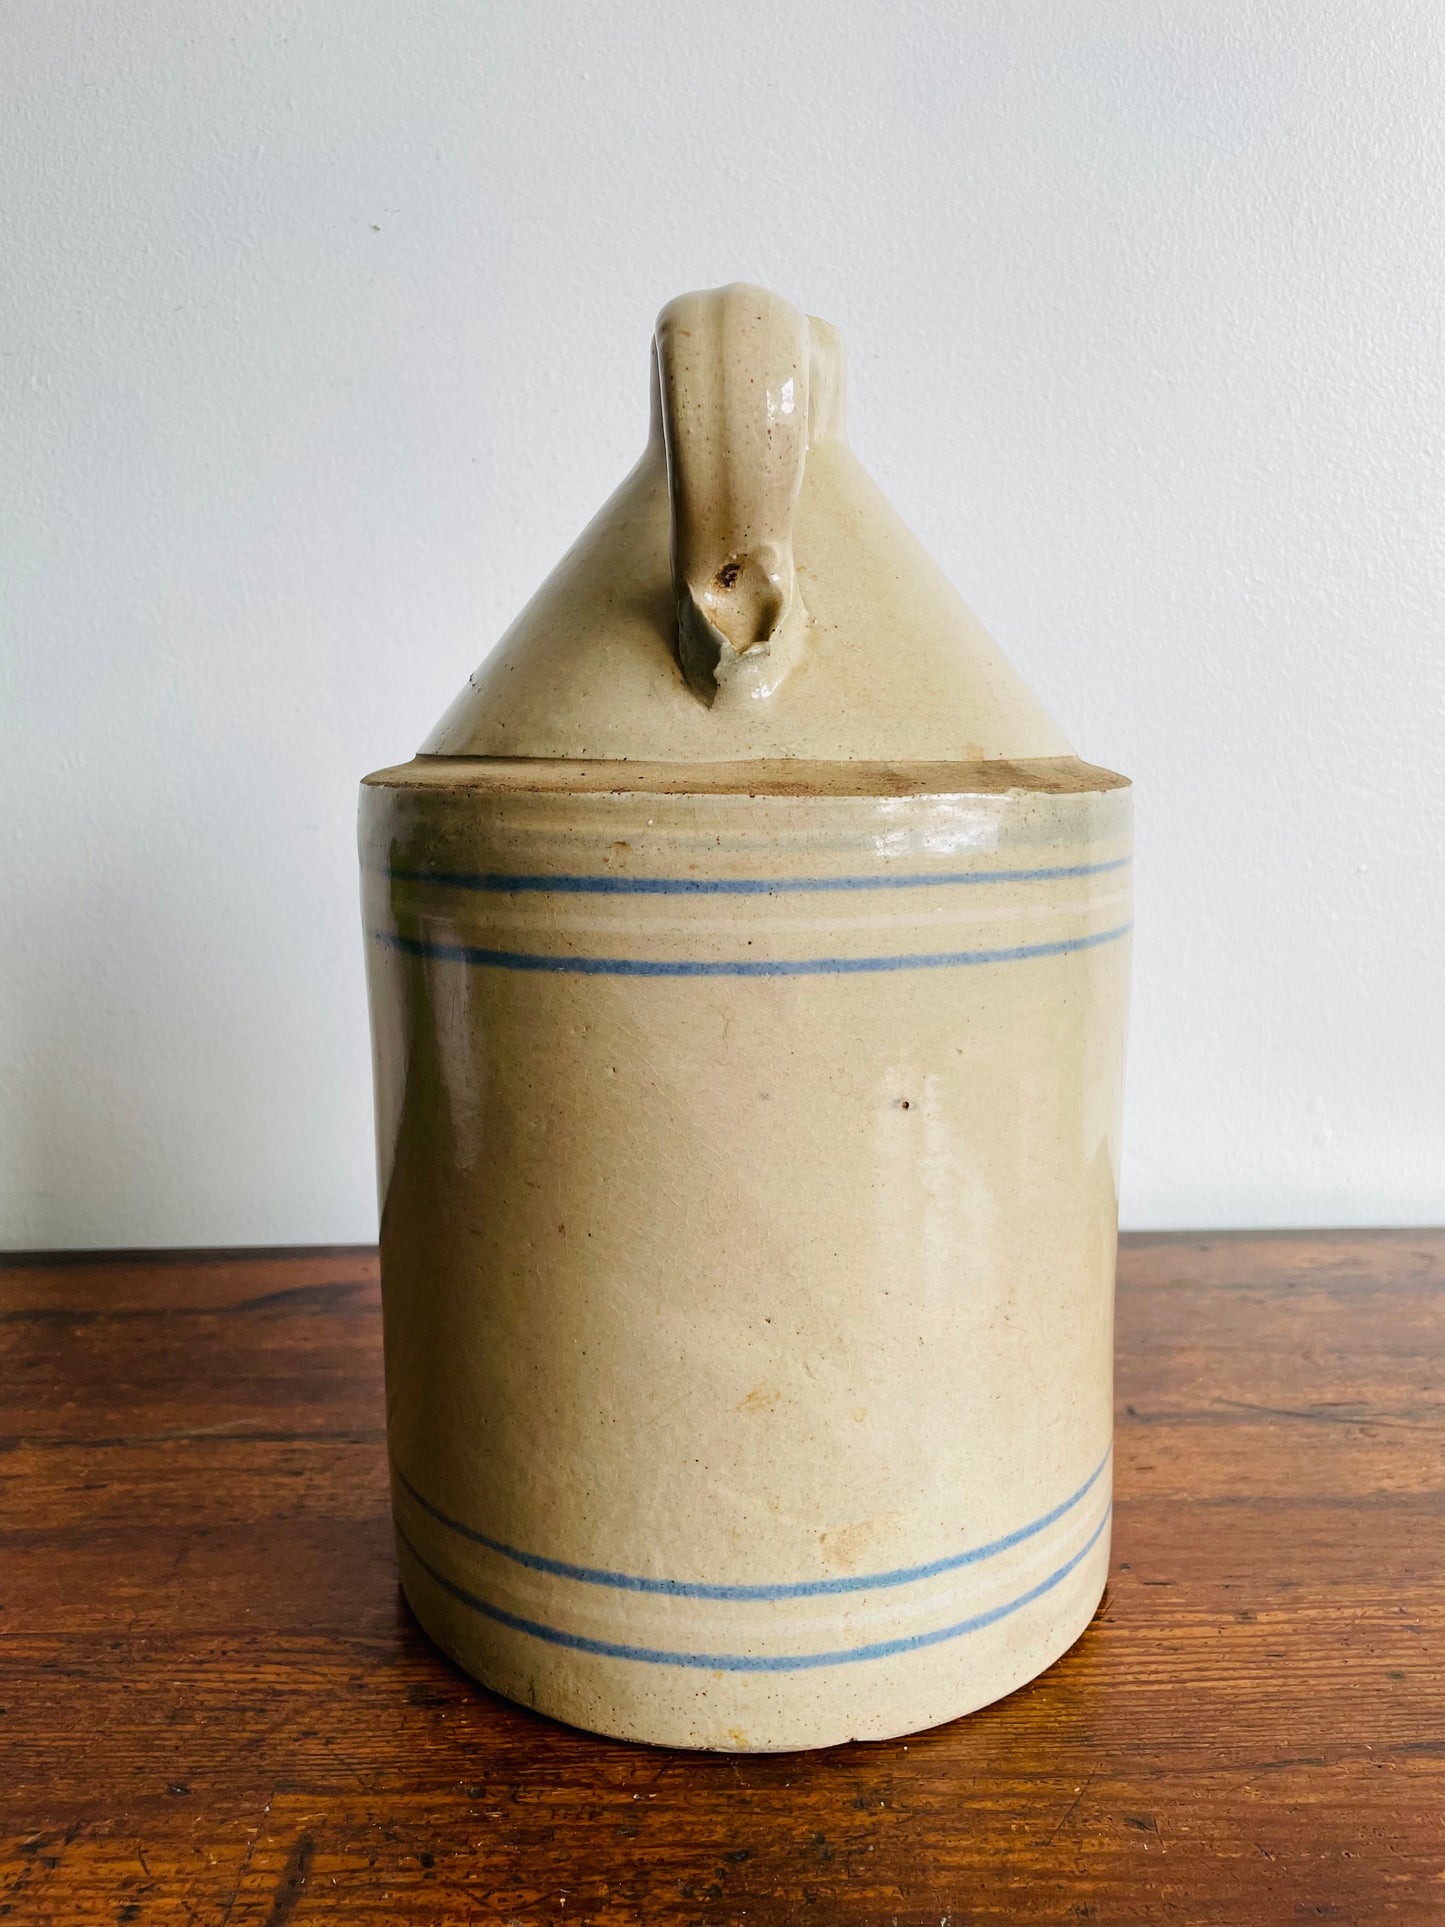 12.5" Tall Stoneware Crock Jug with Blue & White Bands and Handle